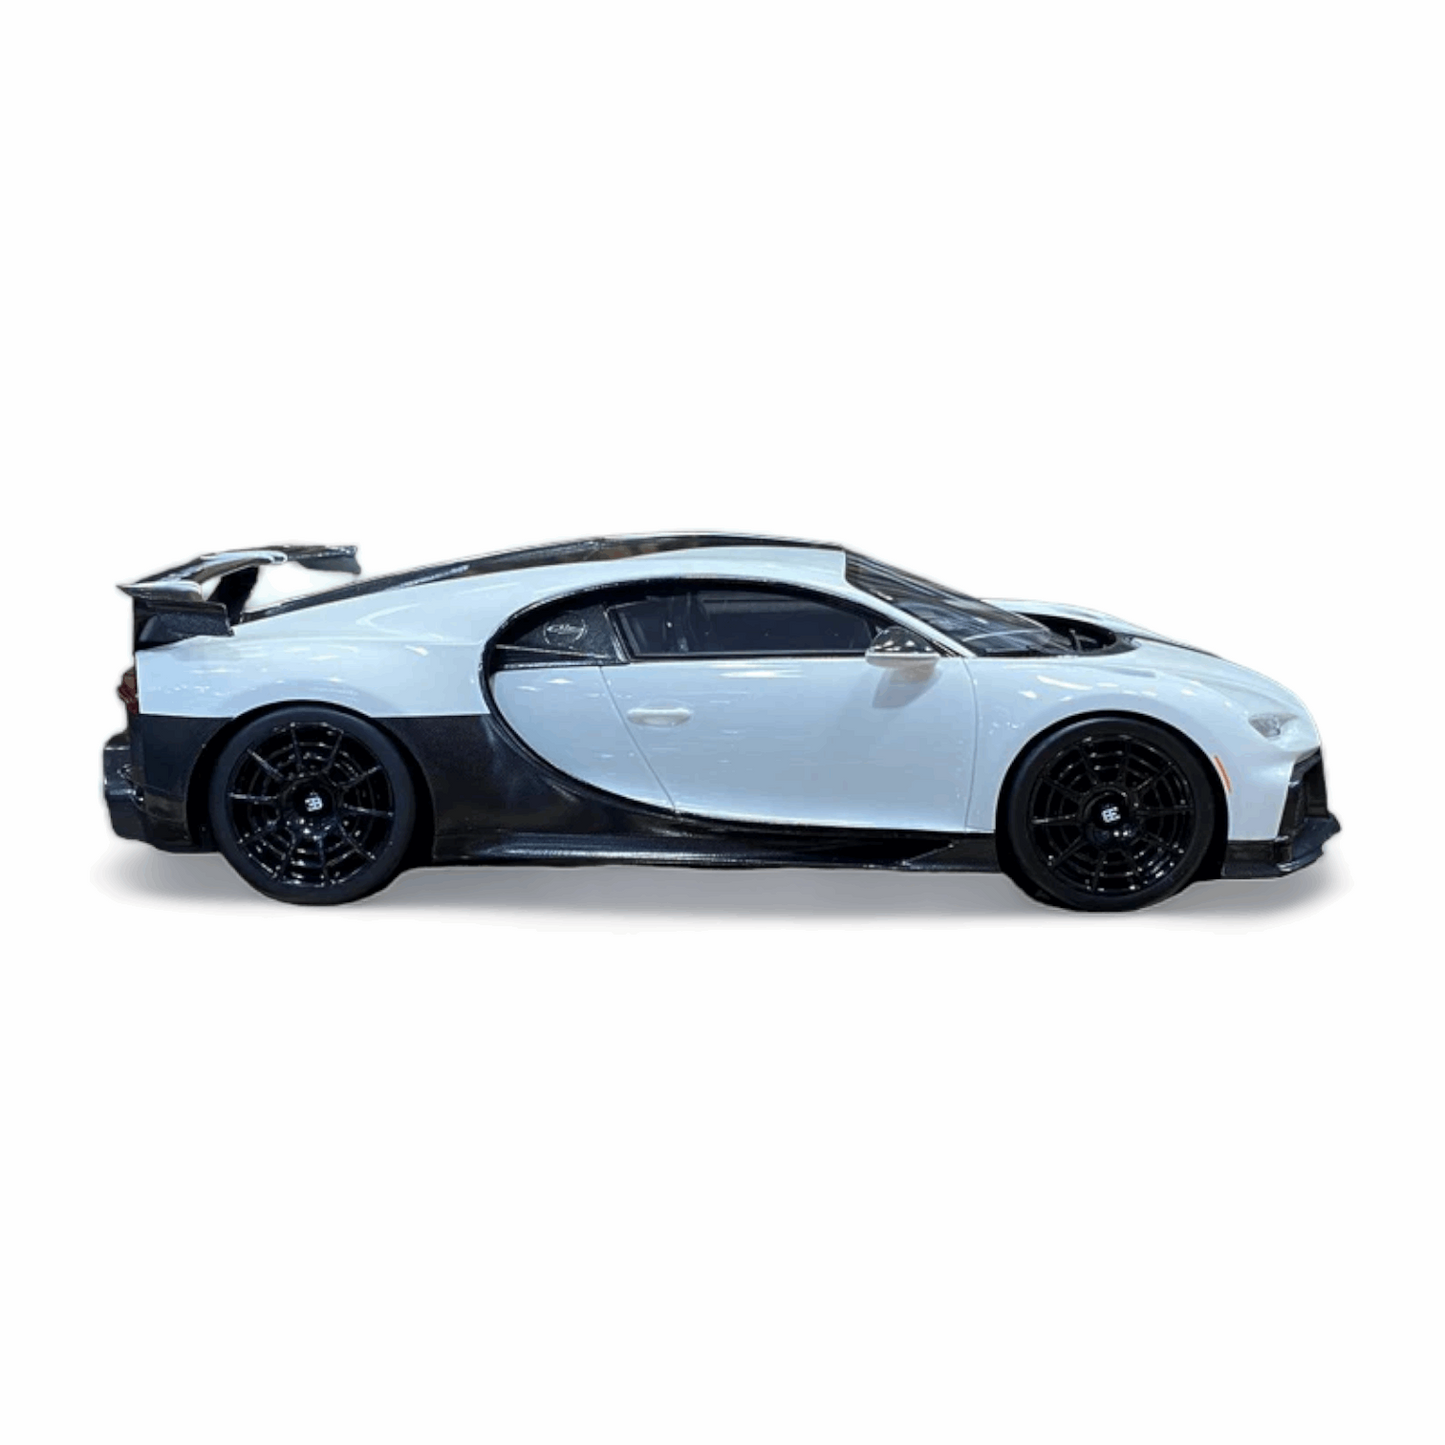 1/18 Bugatti Chiron Pur Sport (White) Limited Edition by Top Speed|Sold in Dturman.com Dubai UAE.